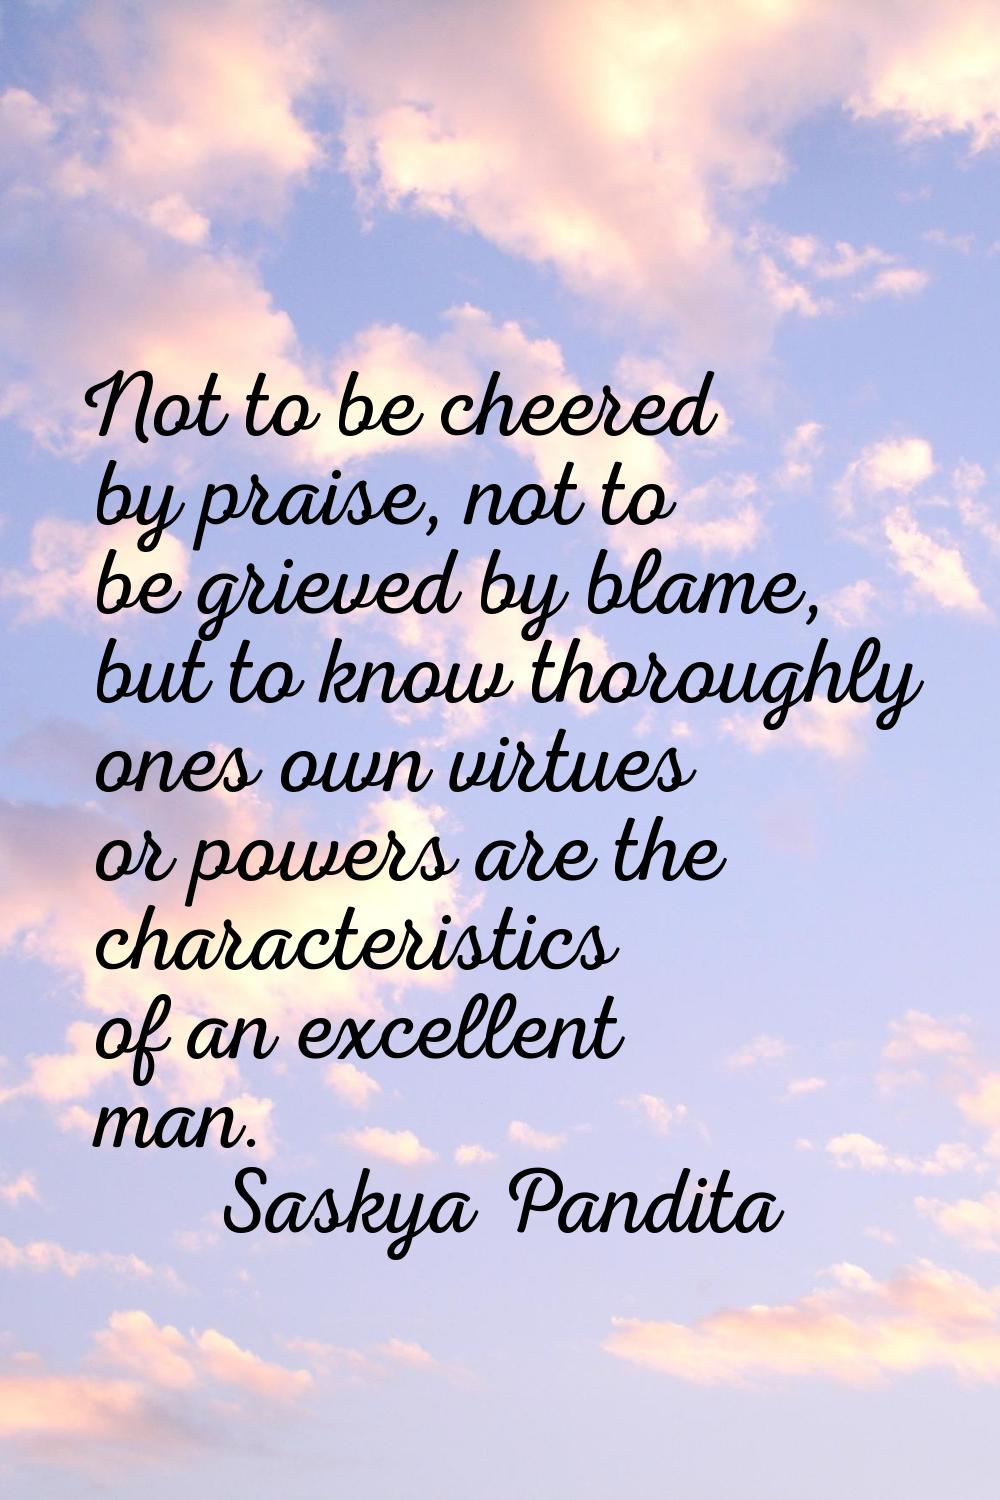 Not to be cheered by praise, not to be grieved by blame, but to know thoroughly ones own virtues or